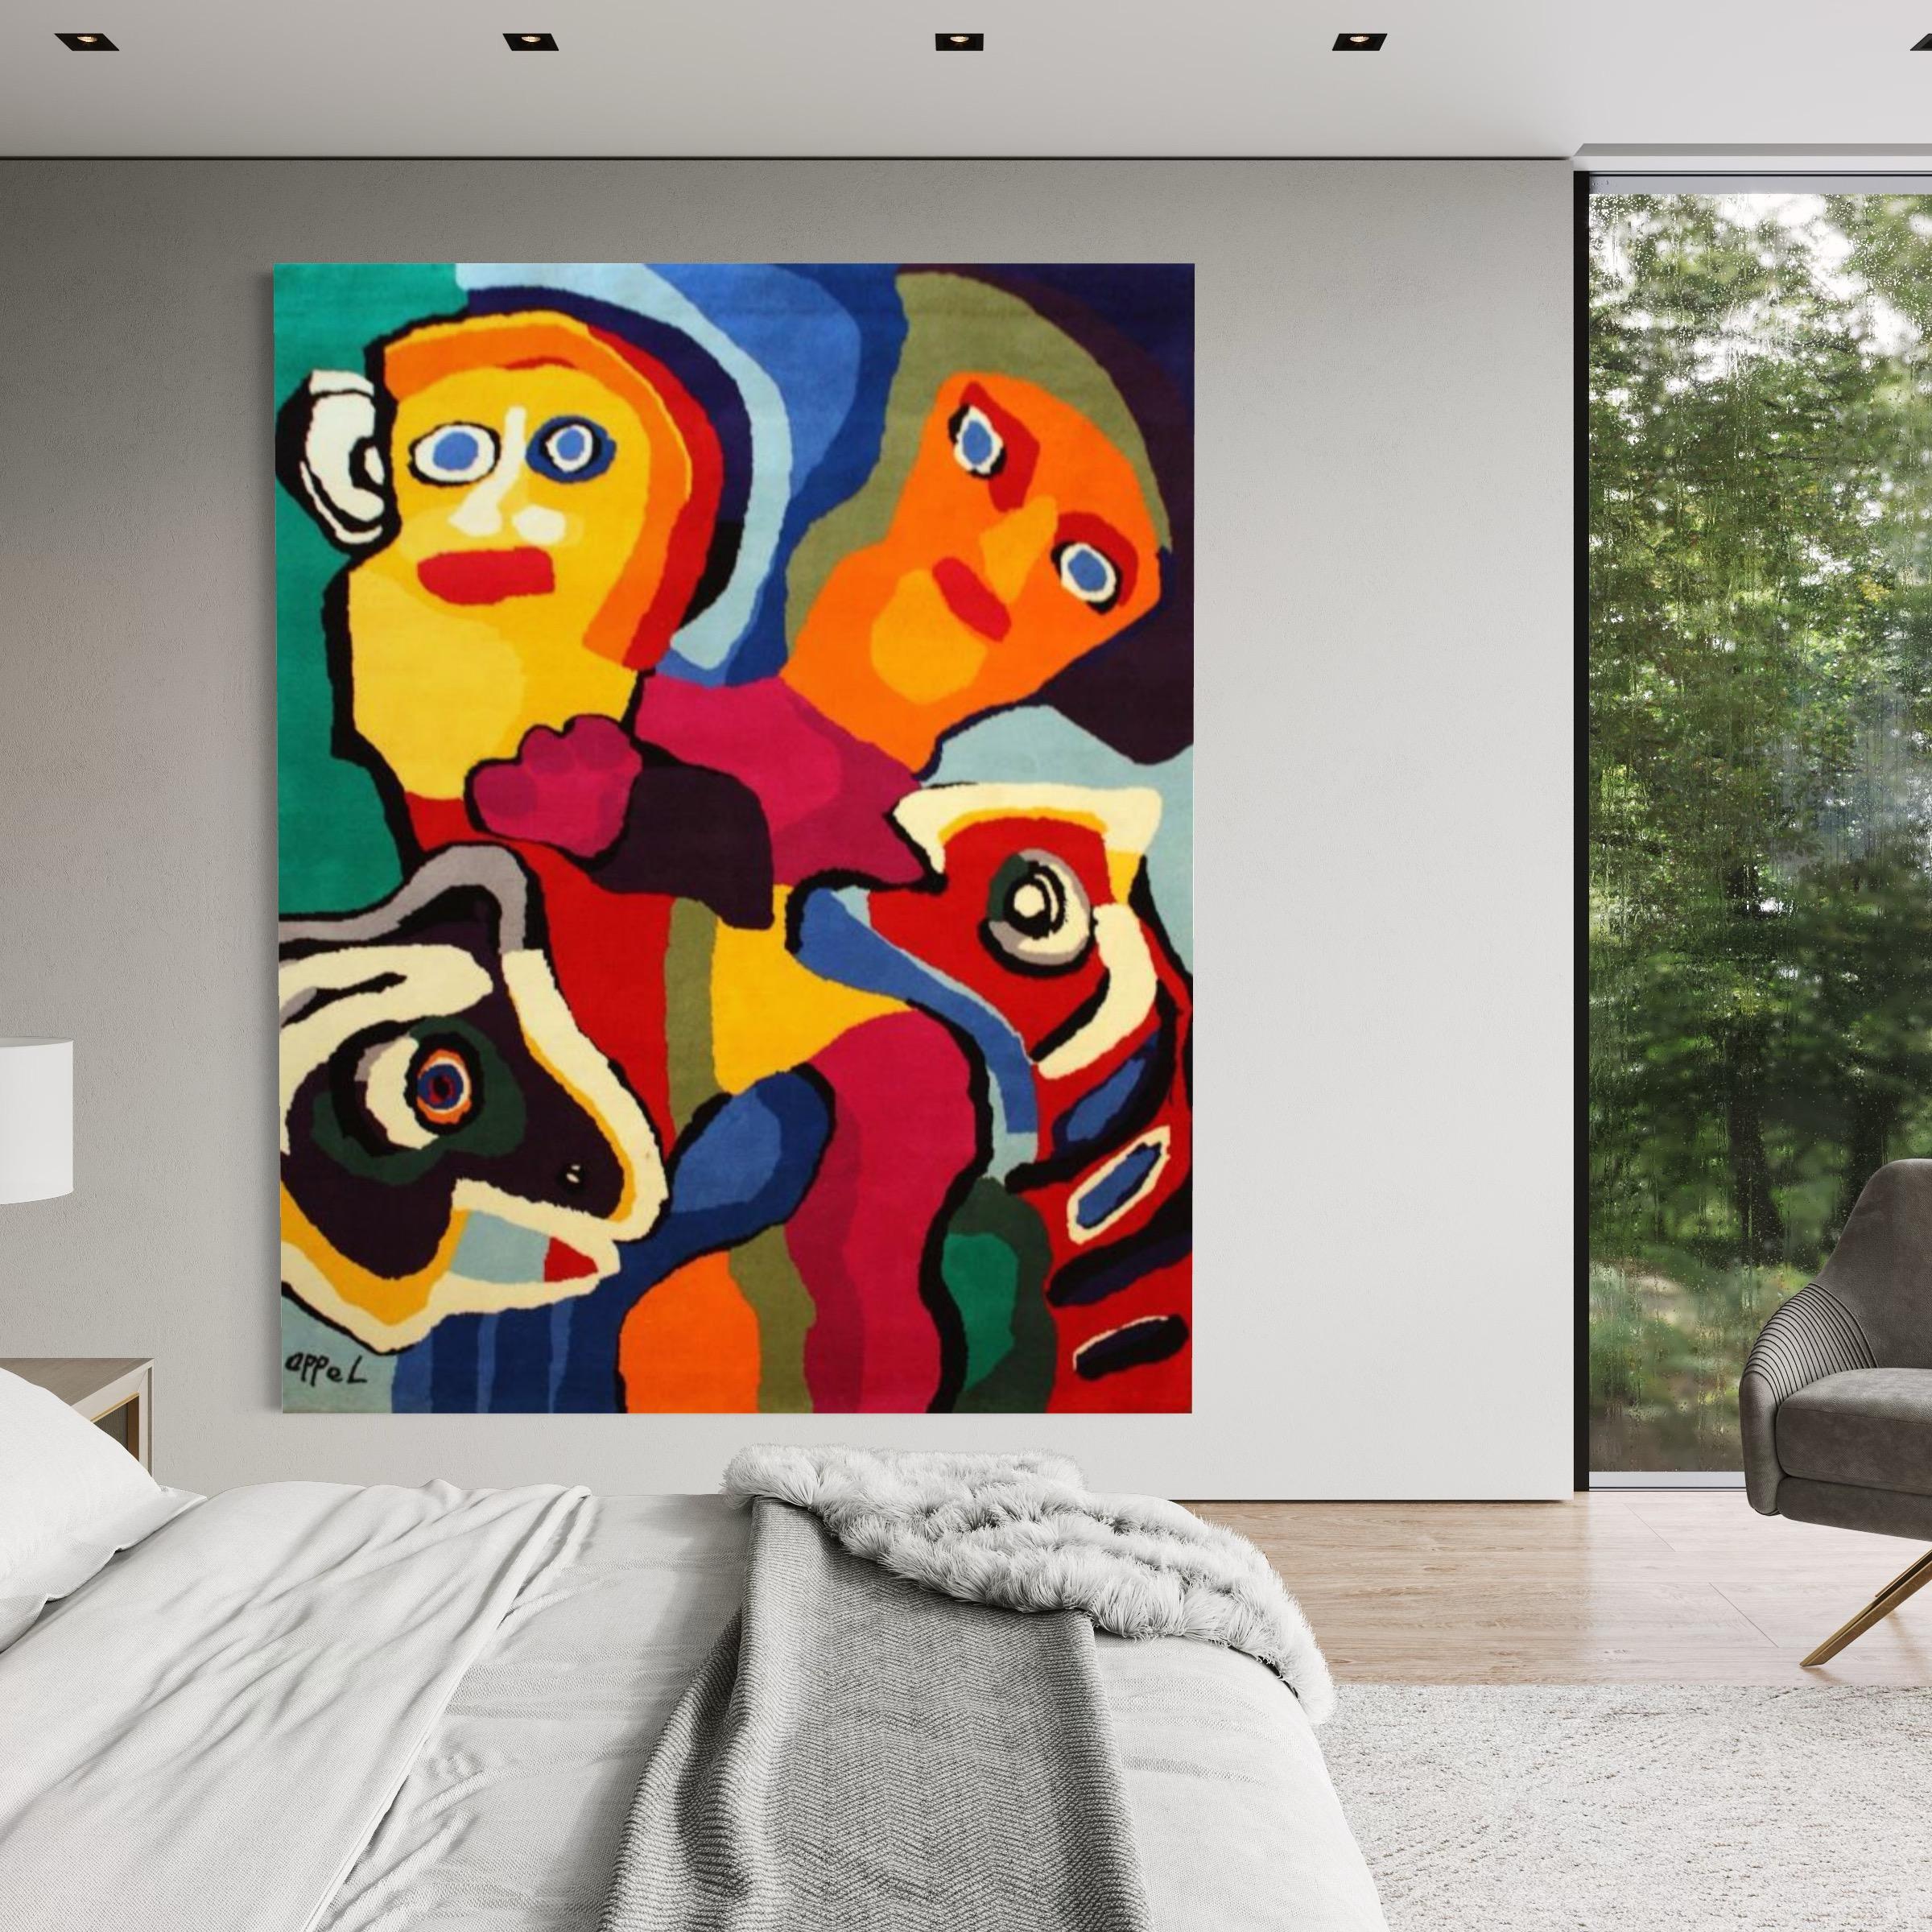 Karel Appel
Smiling Together, 1978
Wool Tapestry
Edition of 10
246 x 196 cm
Woven signature, Copyright Appel woven verso
The artwork is offered unframed.
Edition number might vary from what is shown in the pictures.

Across a nearly six-decade